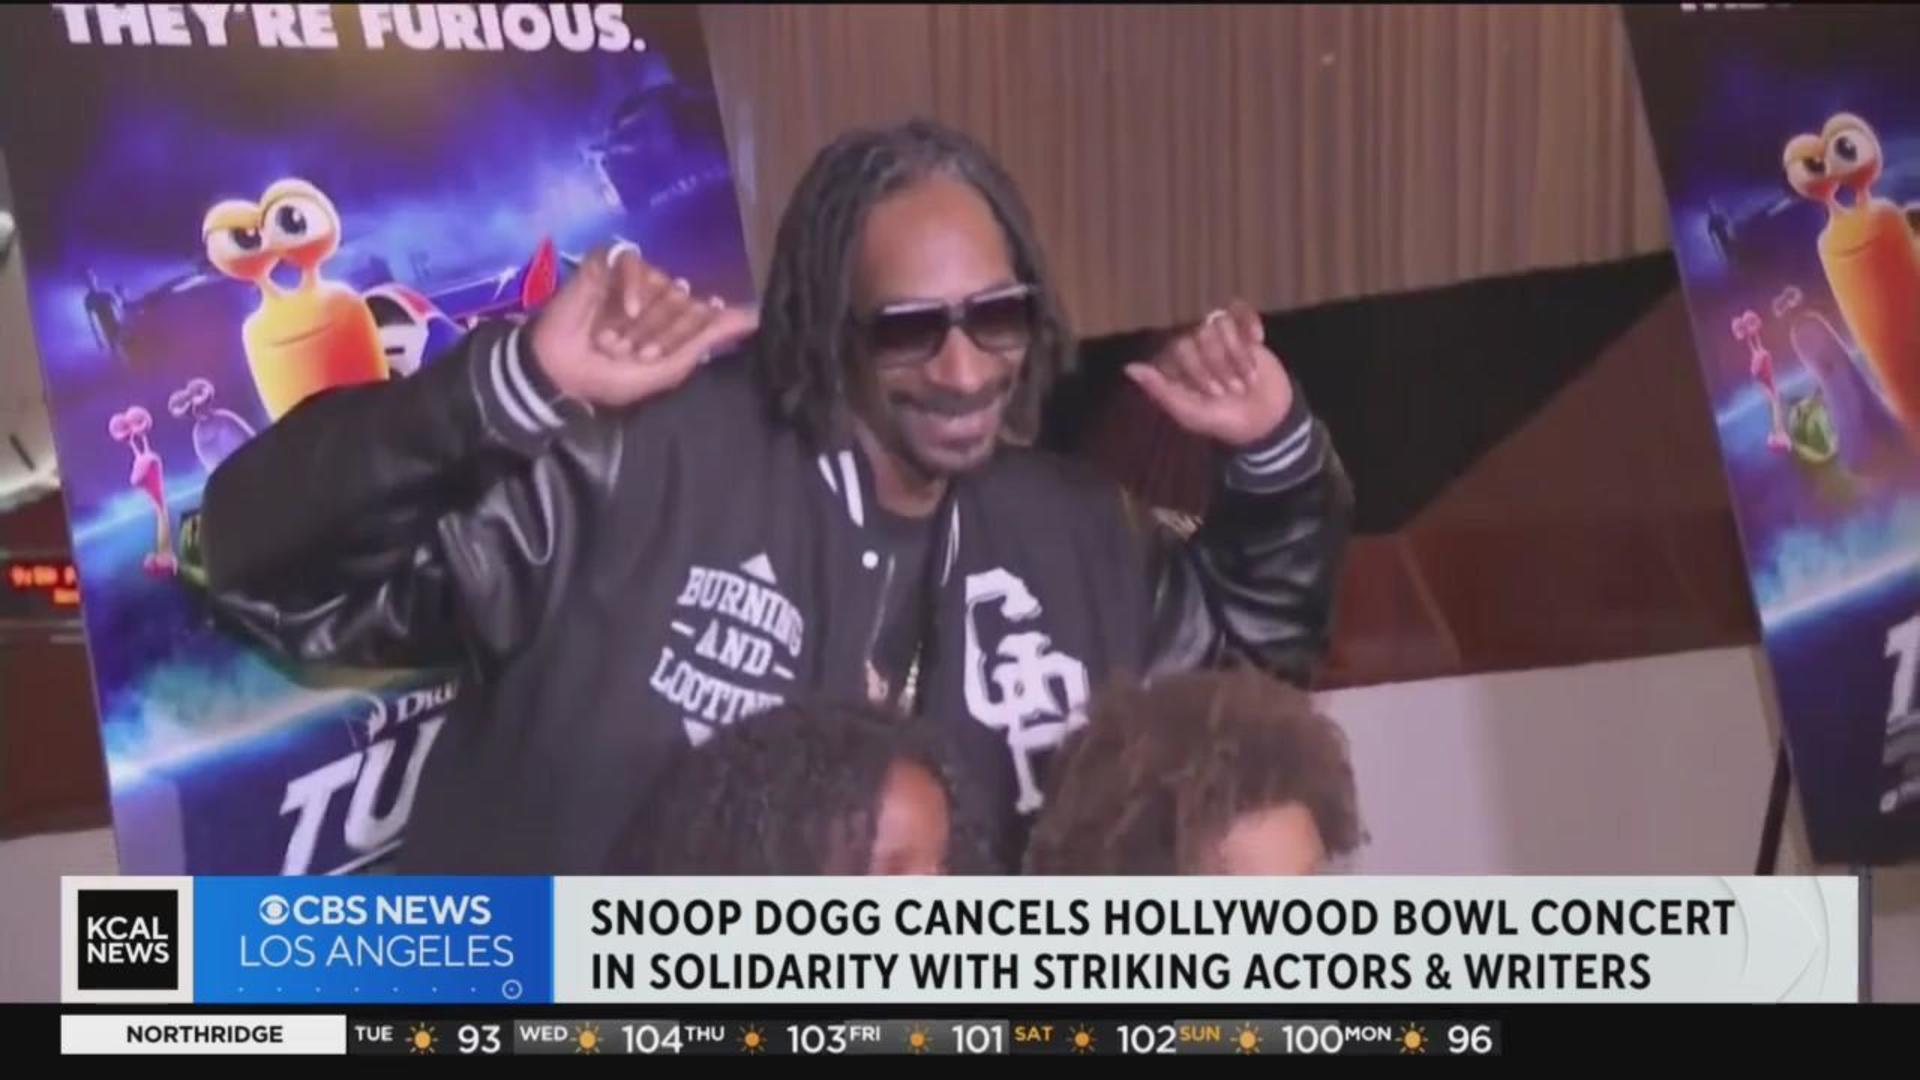 Snoop Dogg & Friends headed to Hollywood Bowl